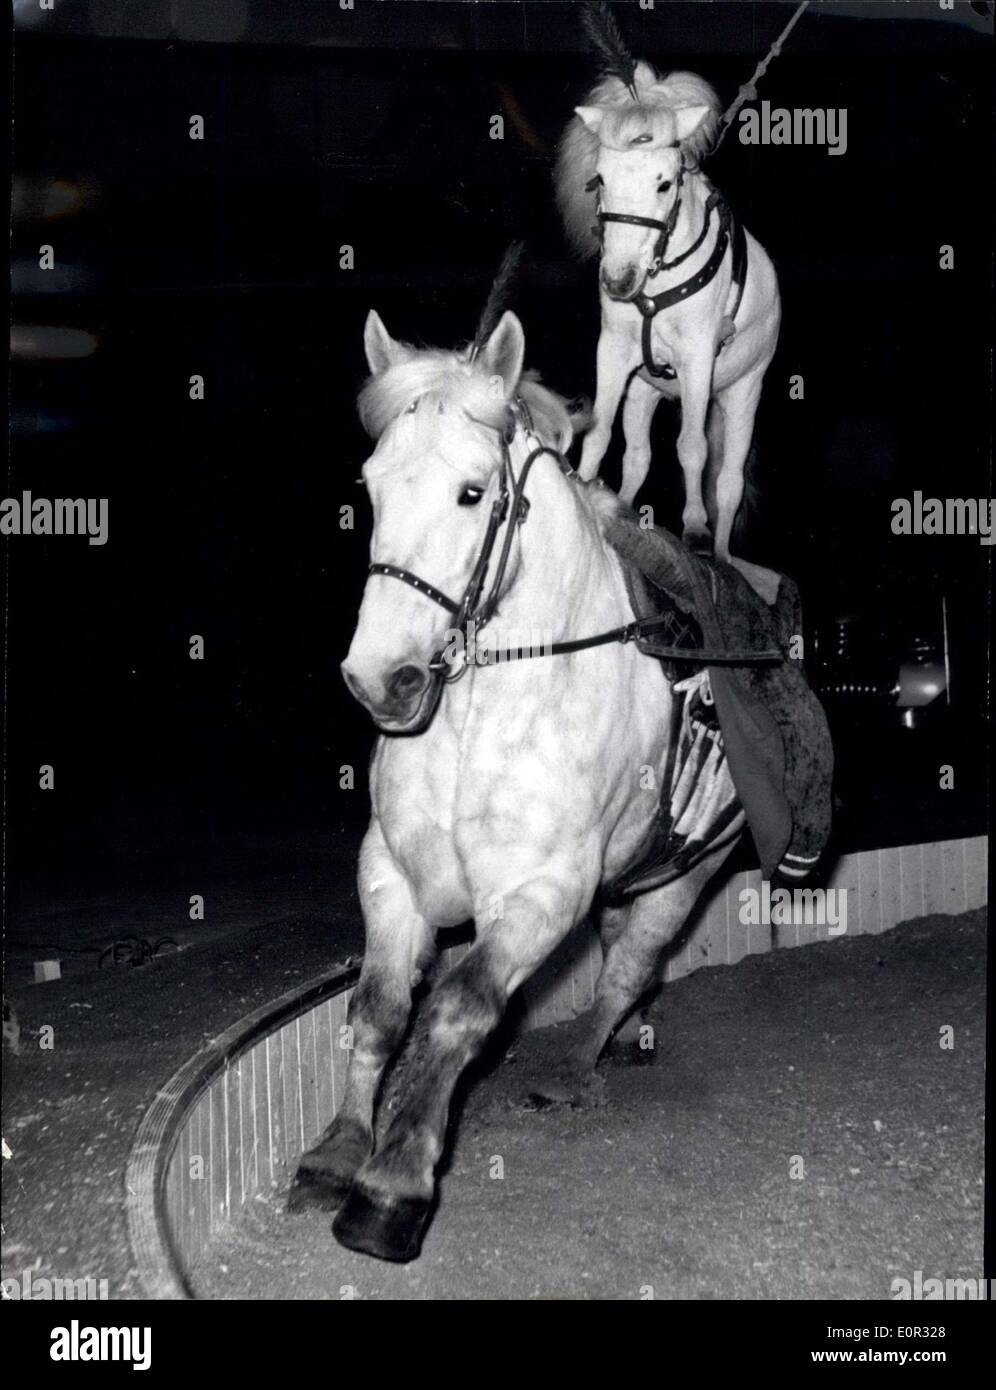 Dec. 26, 1957 - Circus Show In Berlin: A small Shetland Pony rides on the back of a horse. ne Pictures US Stock Photo